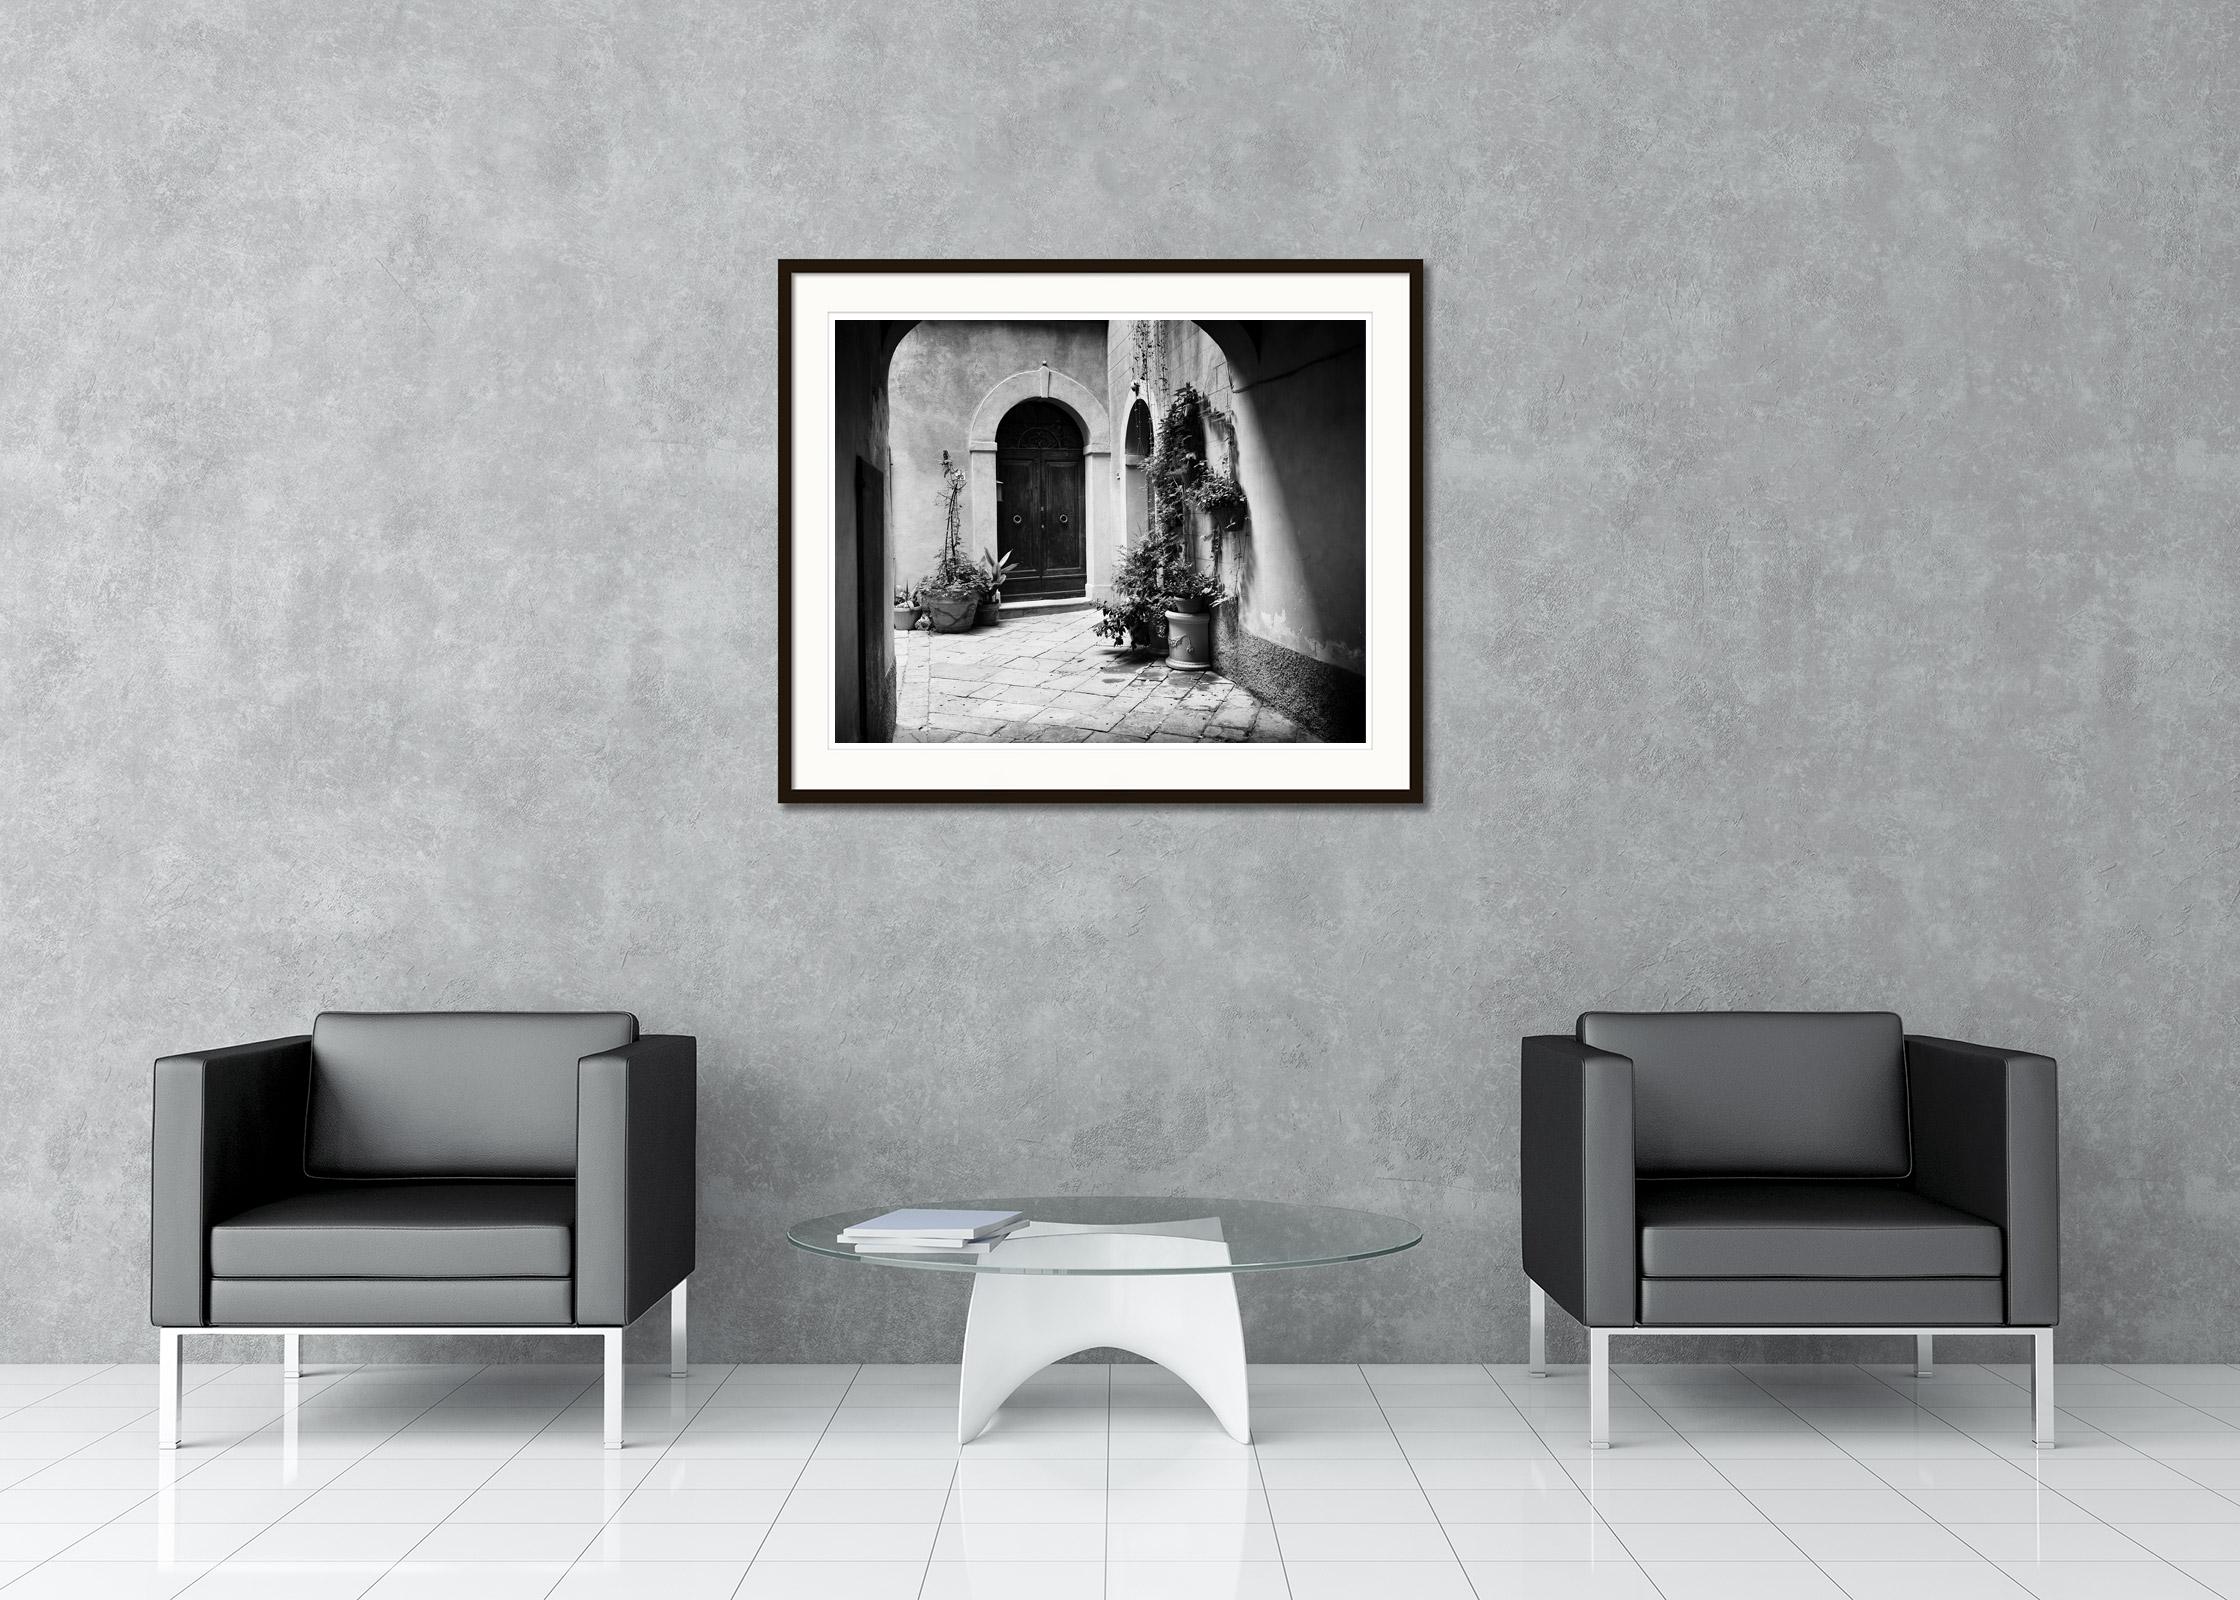 Black and white fine art cityscape - landscape photography. Beautiful courtyard with plants and an old front door, Tuscany, Itlay. Archival pigment ink print, edition of 5. Signed, titled, dated and numbered by artist. Certificate of authenticity